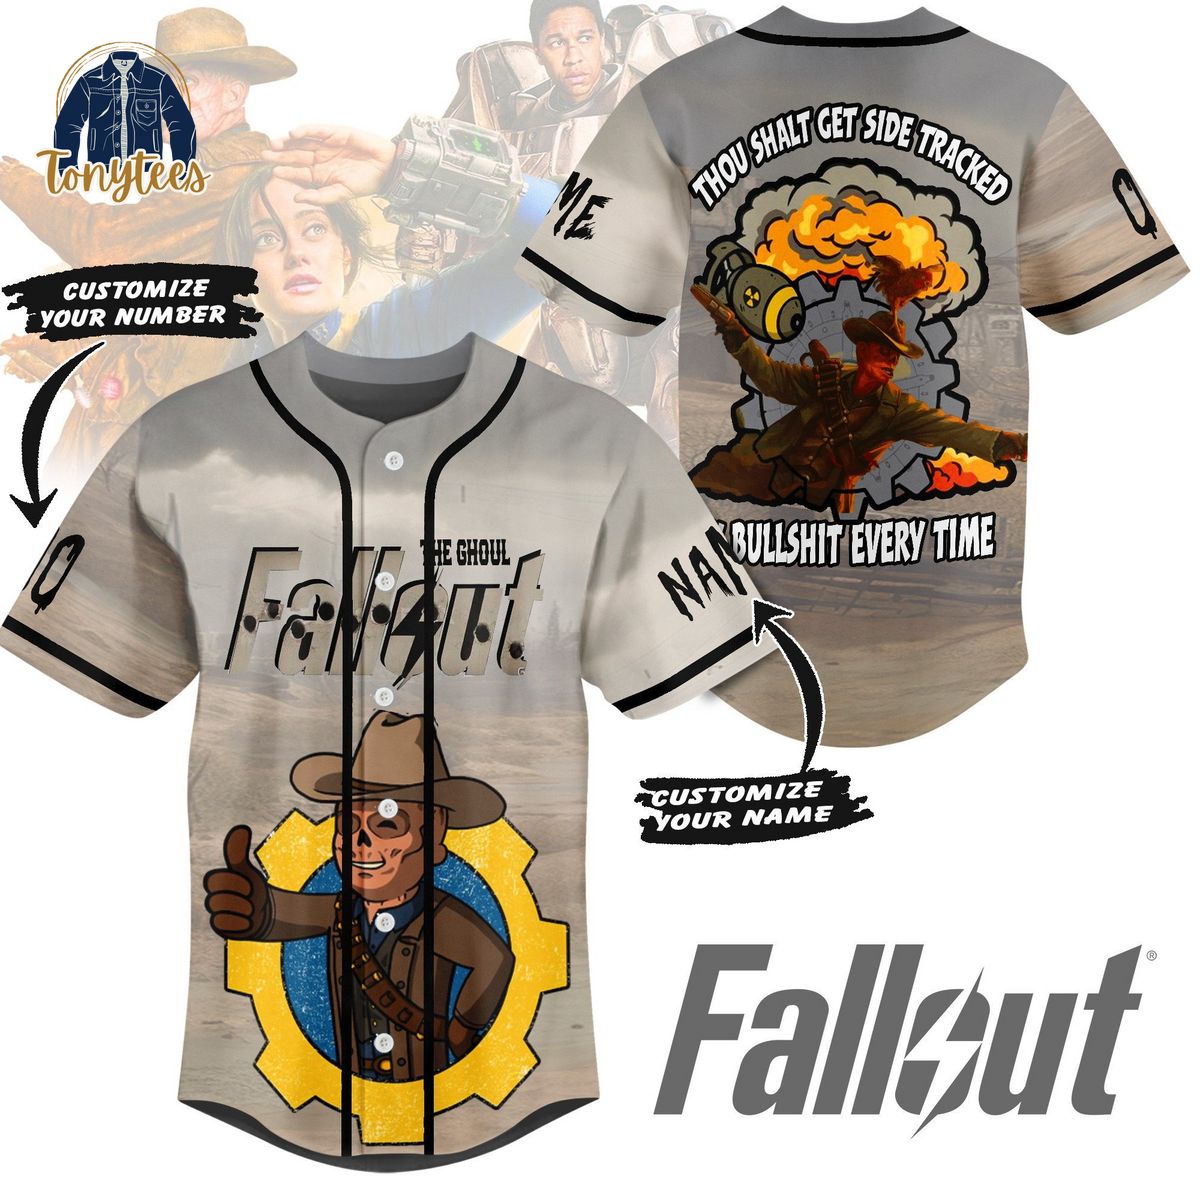 Personalized Fallout Thou Shalt Get Side Tracked By Bullshit Every Time Hawaiian Shirt